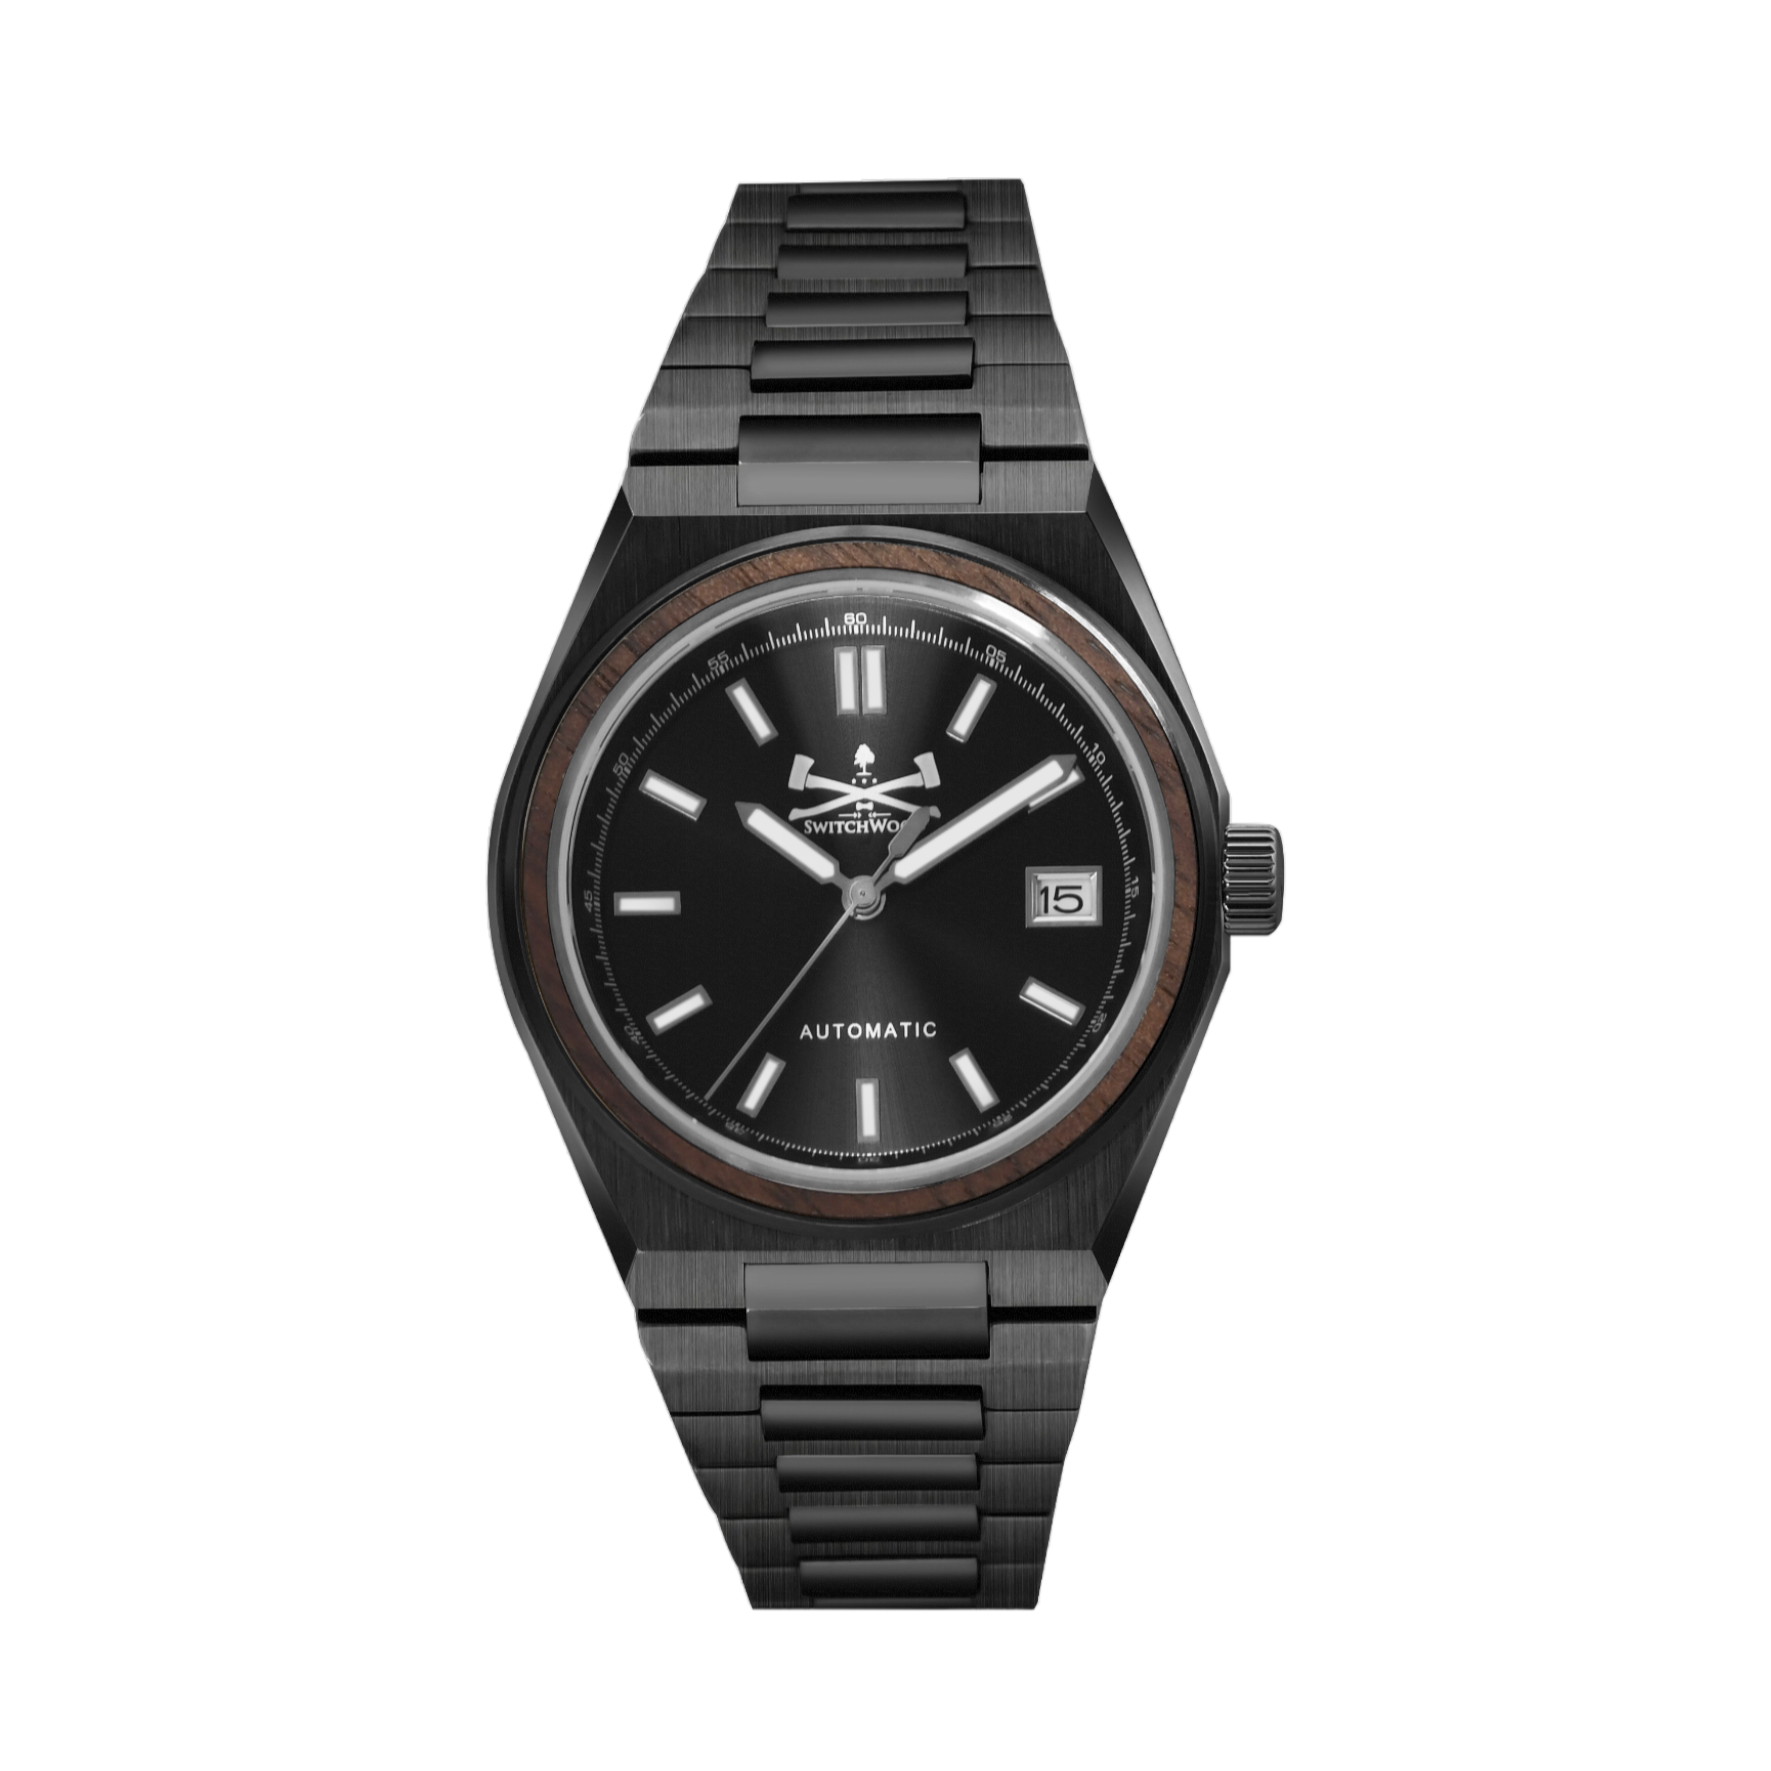 NEW chronos black mens watch - general for sale - by owner - craigslist